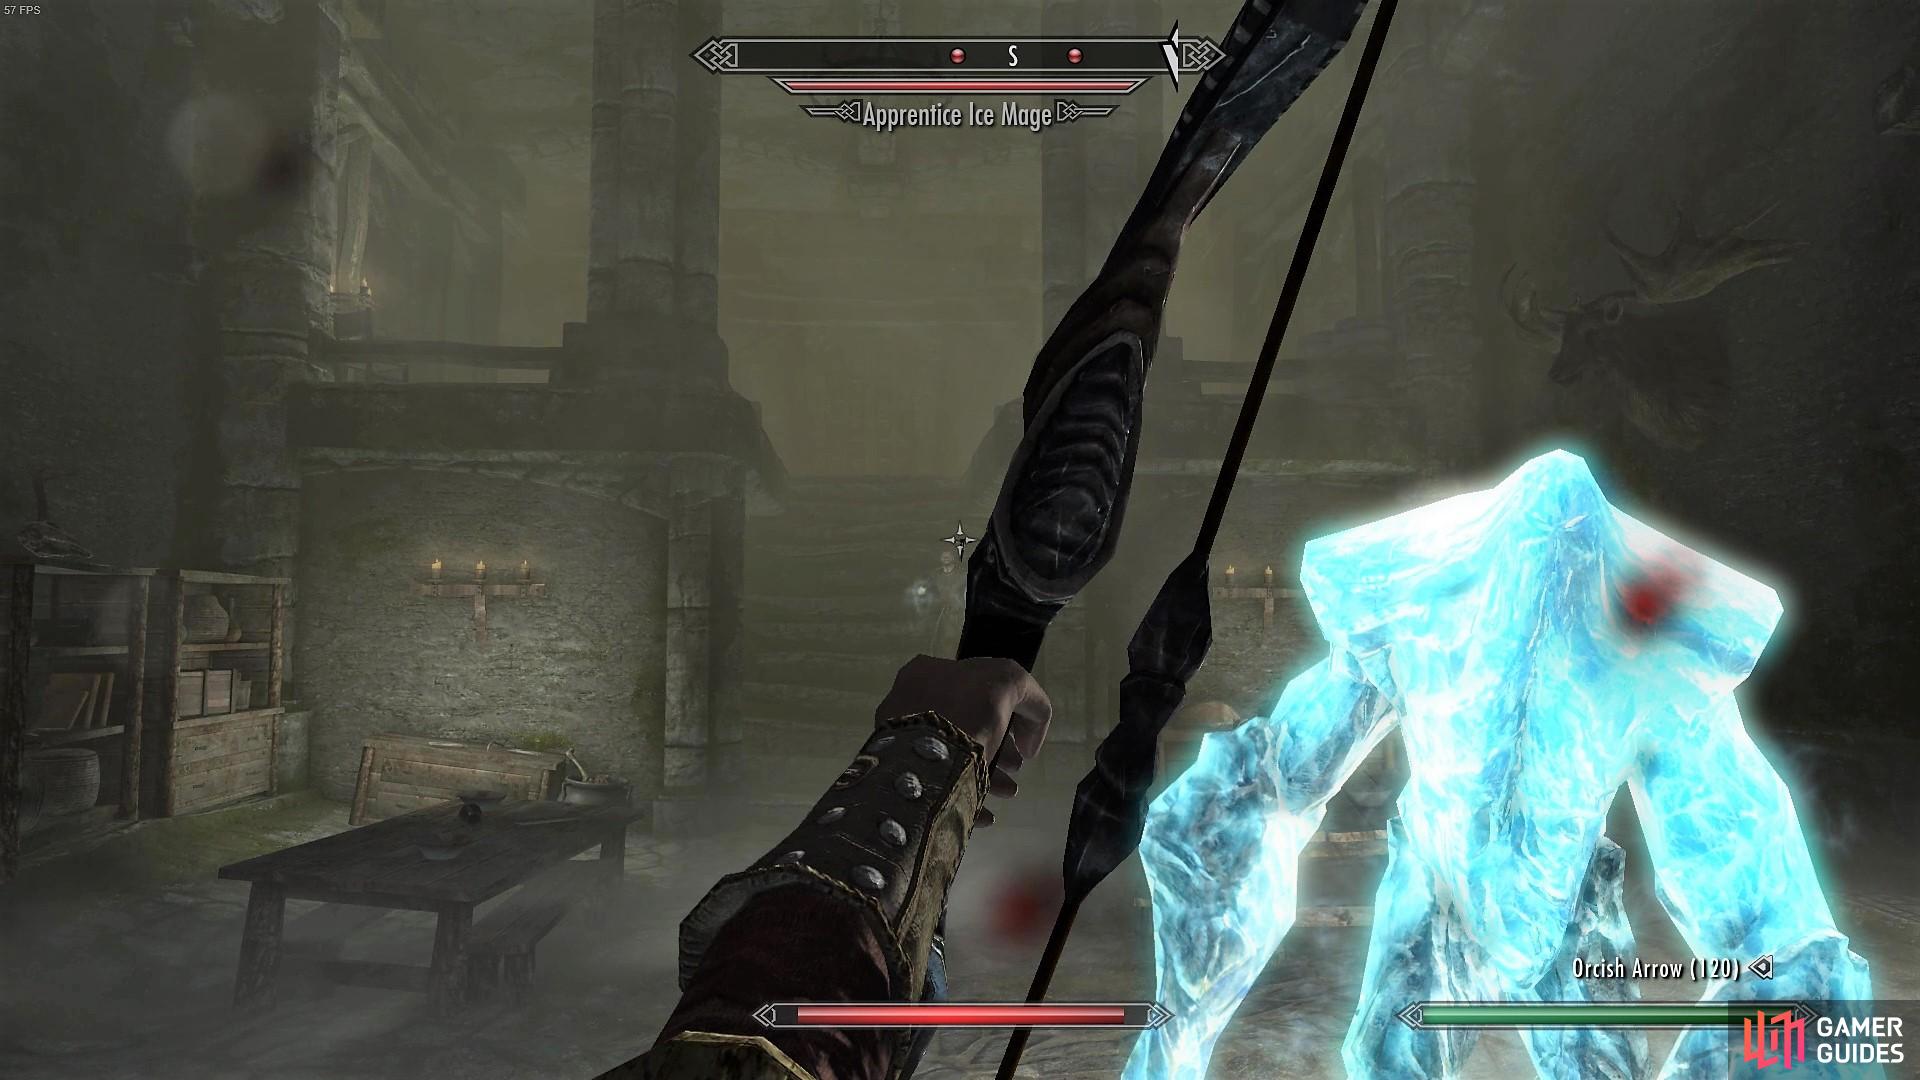 Watch out for the Mage and his Frost Atronach!